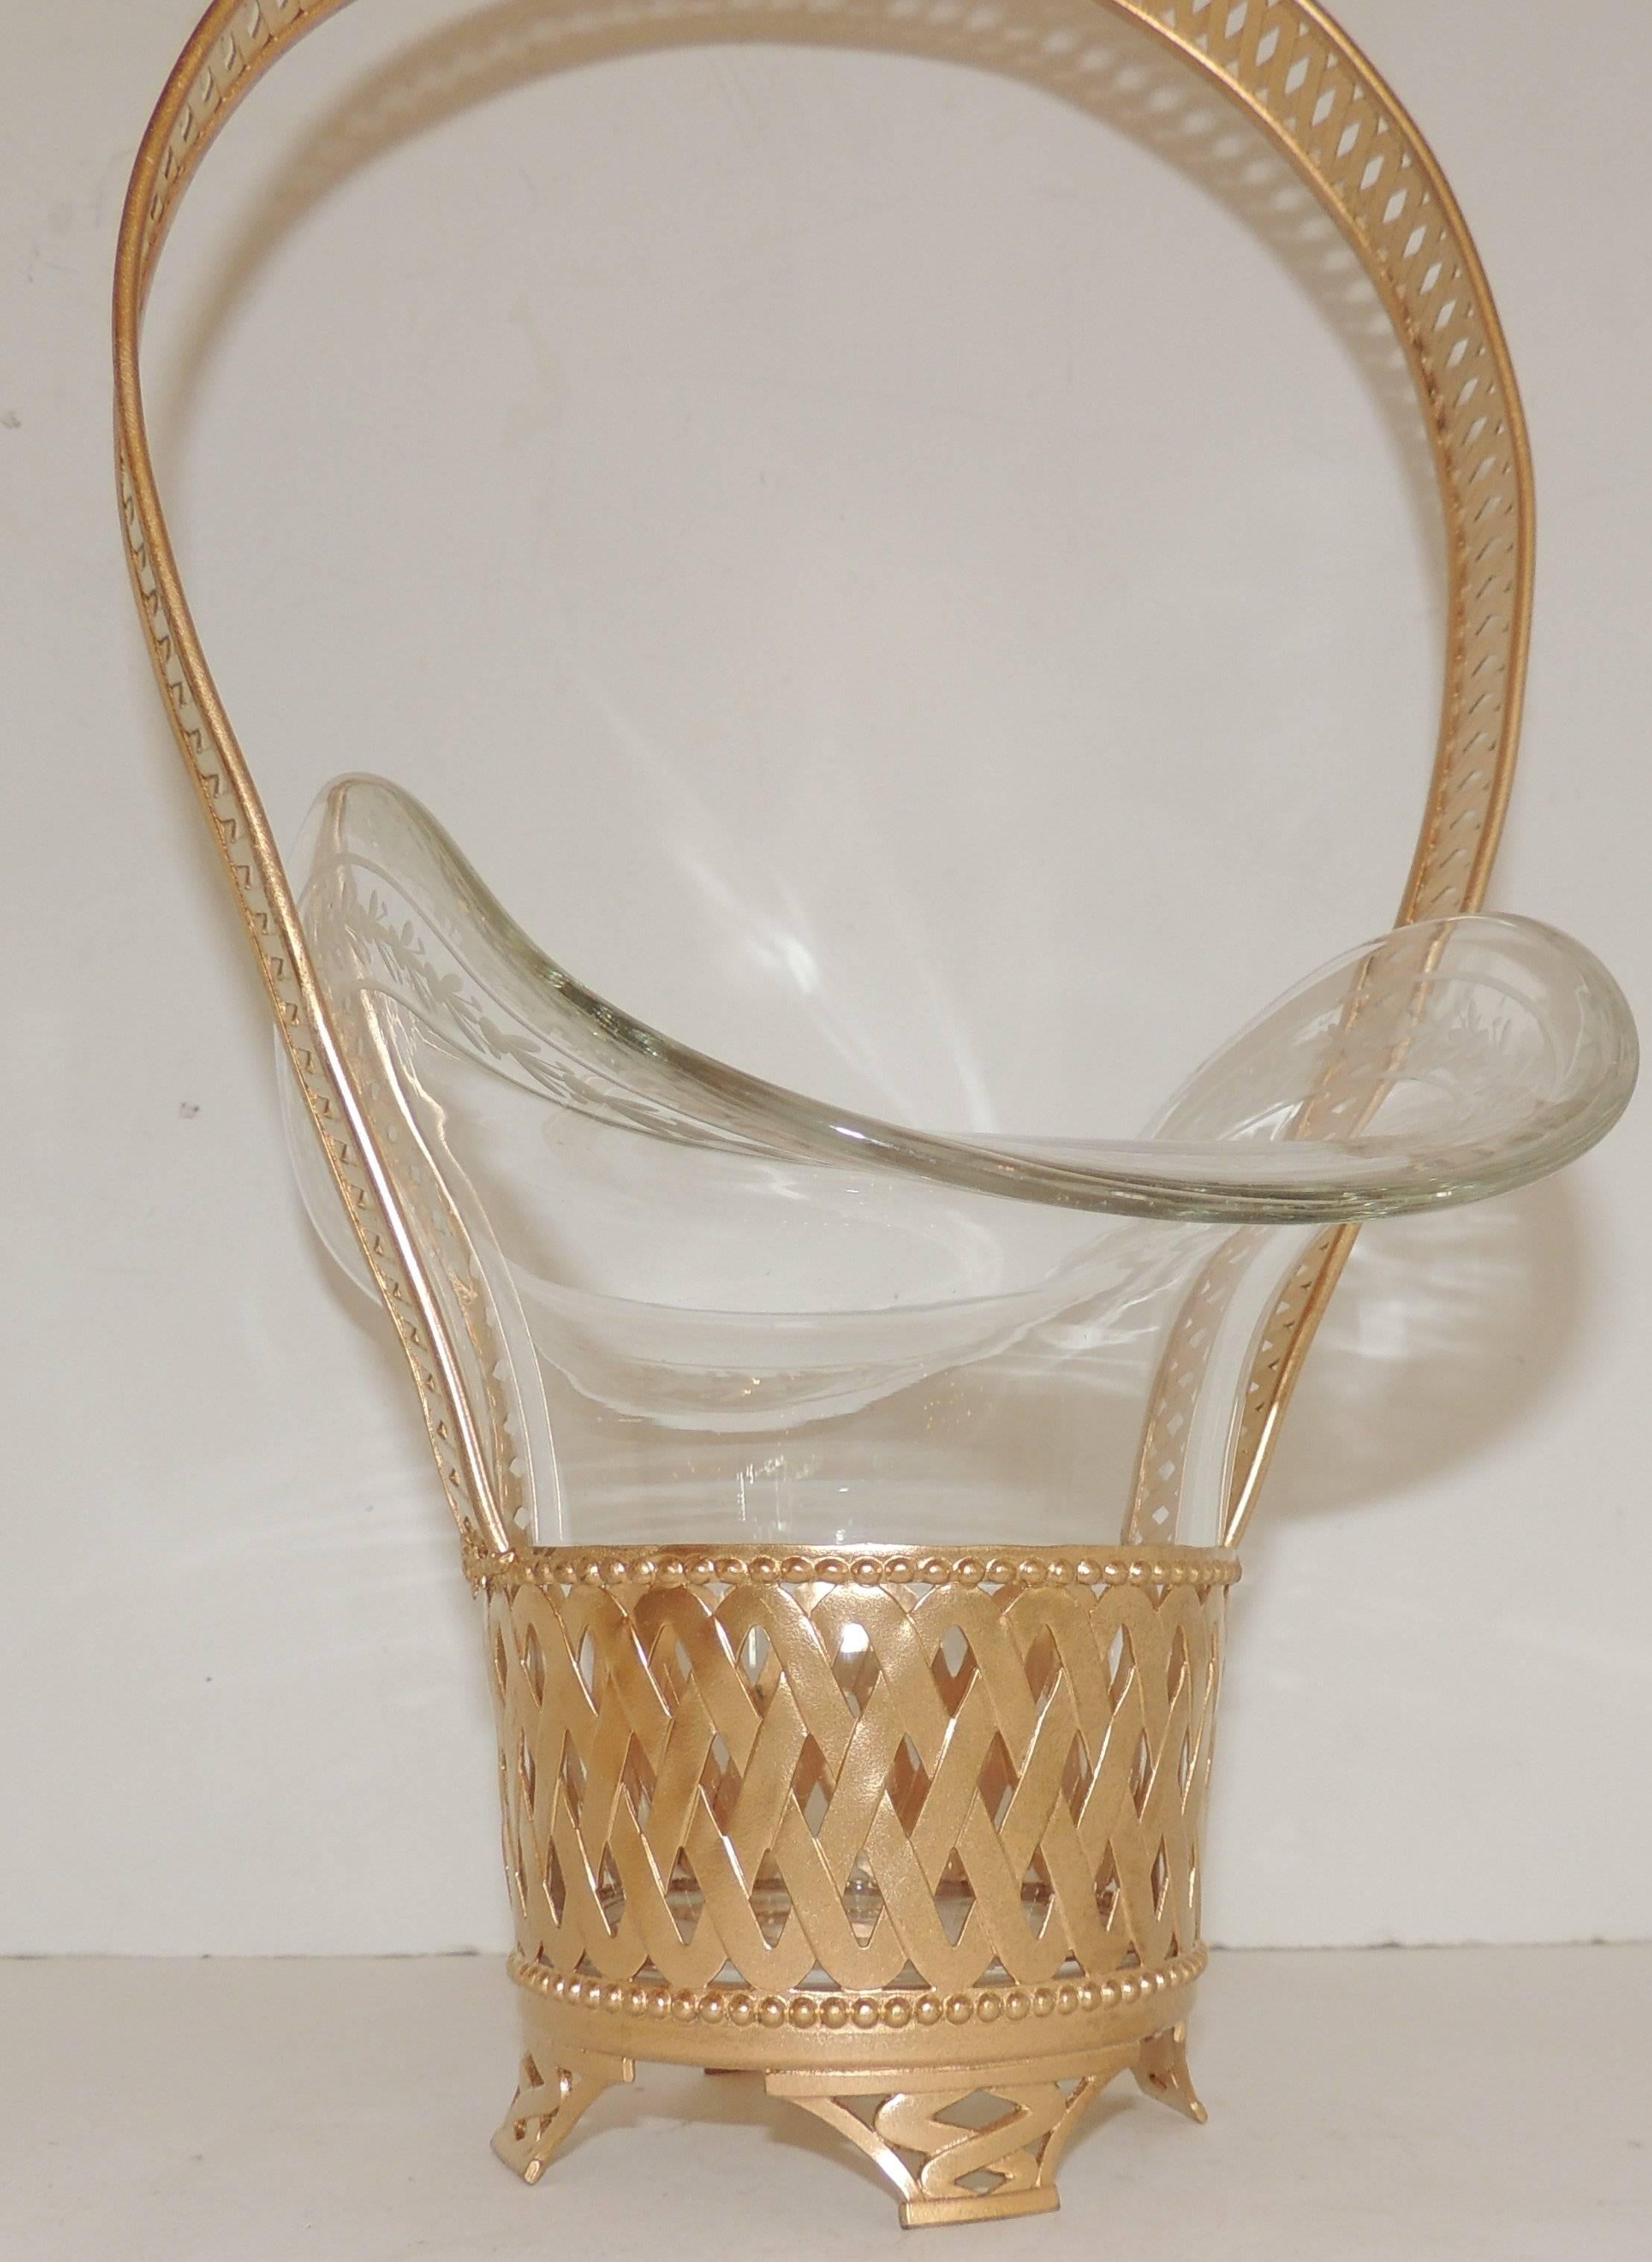 Mid-20th Century Wonderful French Doré Bronze Woven Brass Basket Etched Crystal Glass Insert